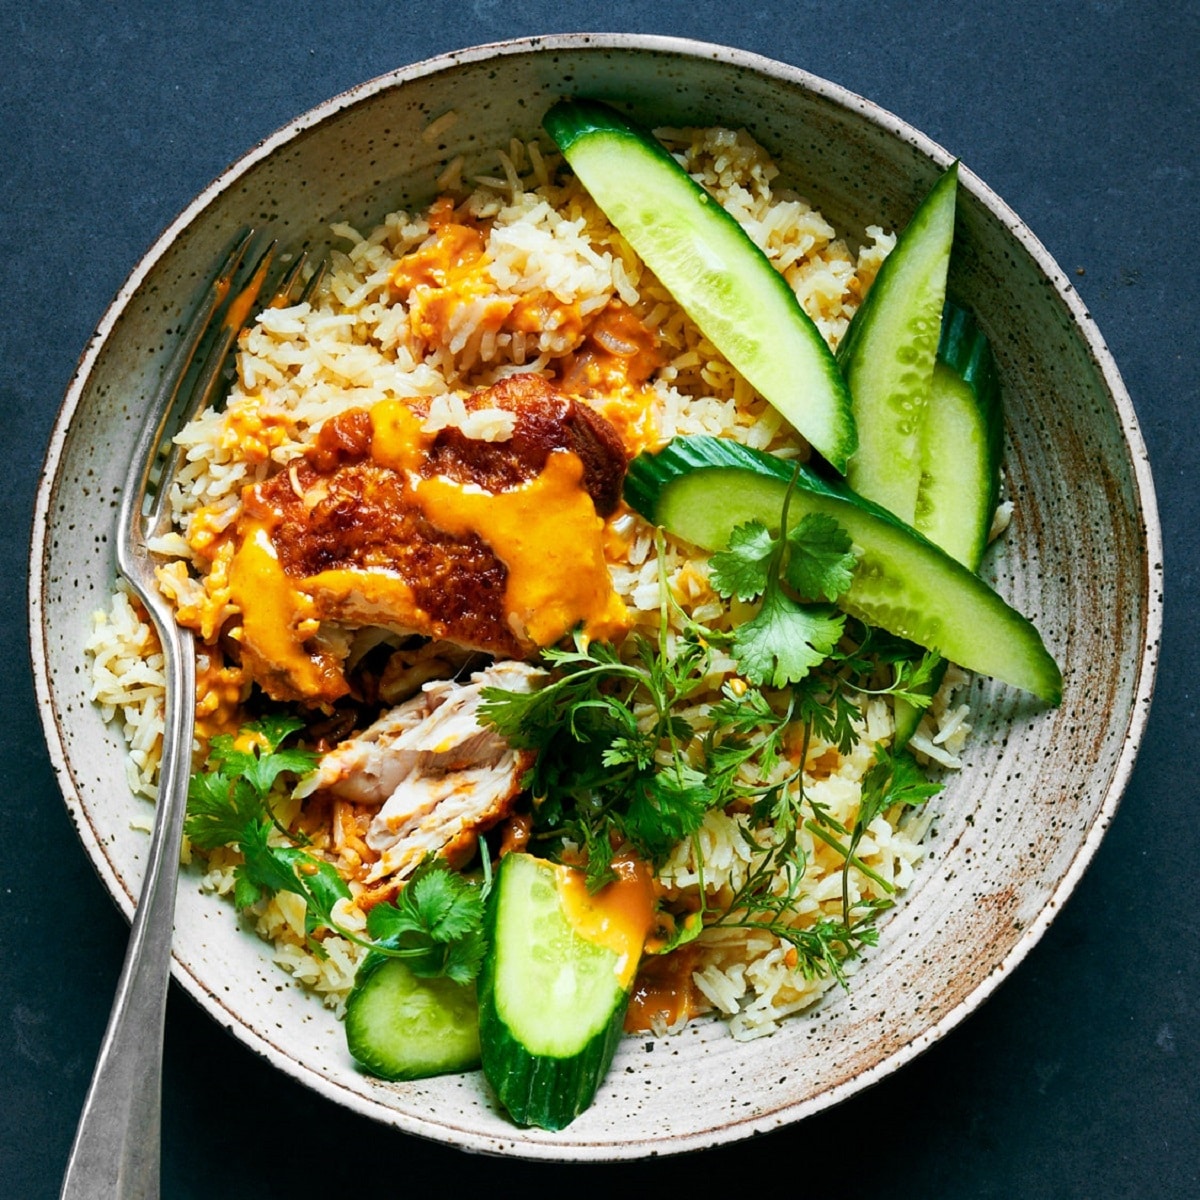 Gingery chicken and rice with peanut sauce in a bowl